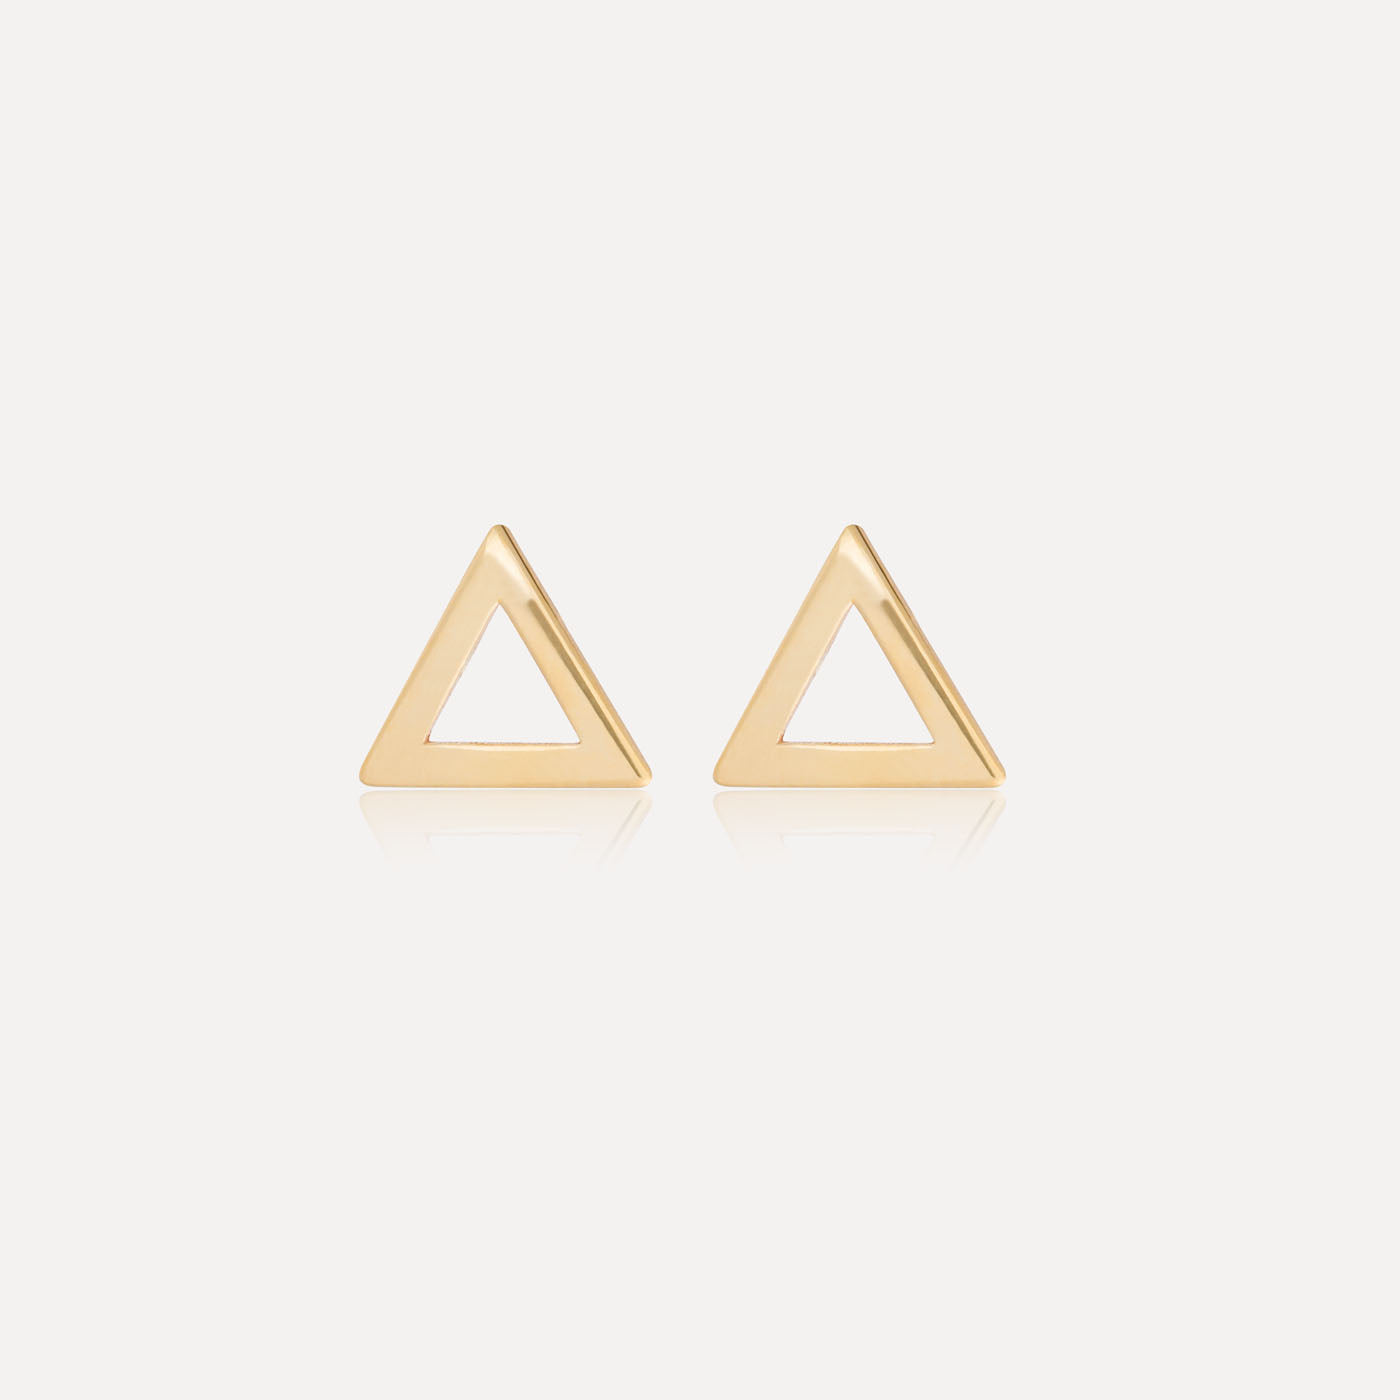 9ct Gold Open Triangle Earring studs